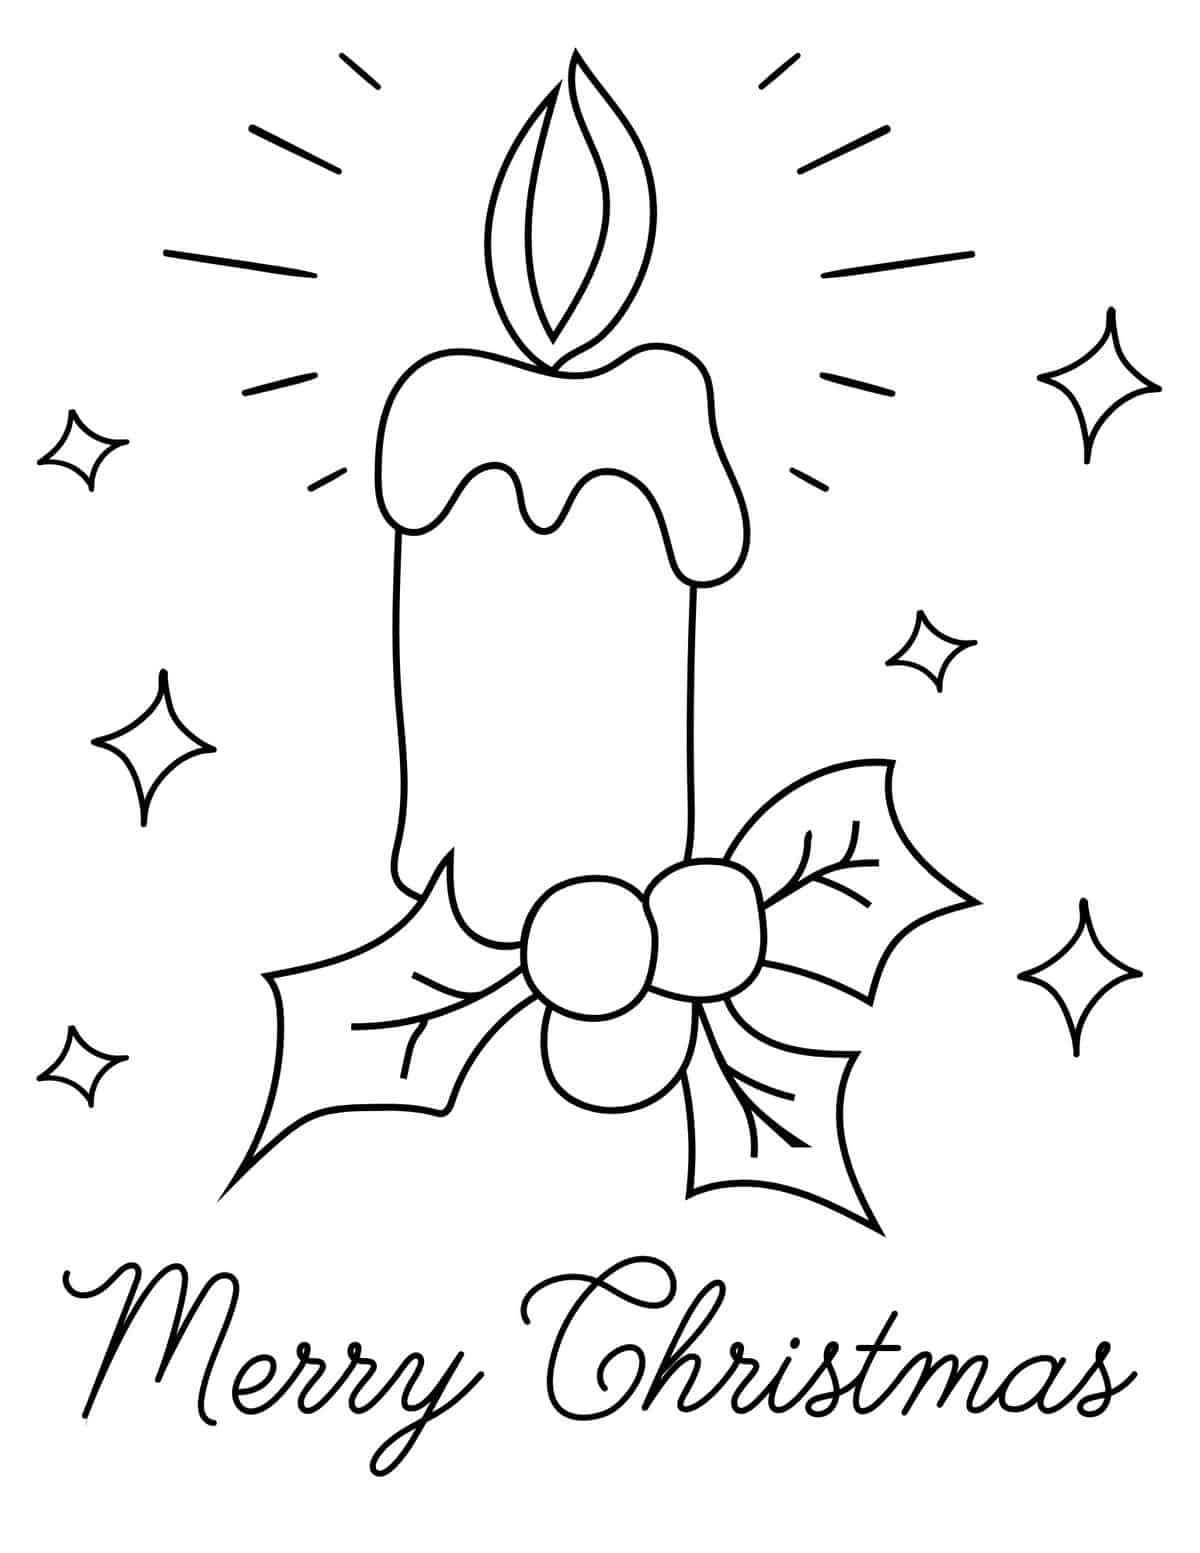 Christmas candle coloring sheet